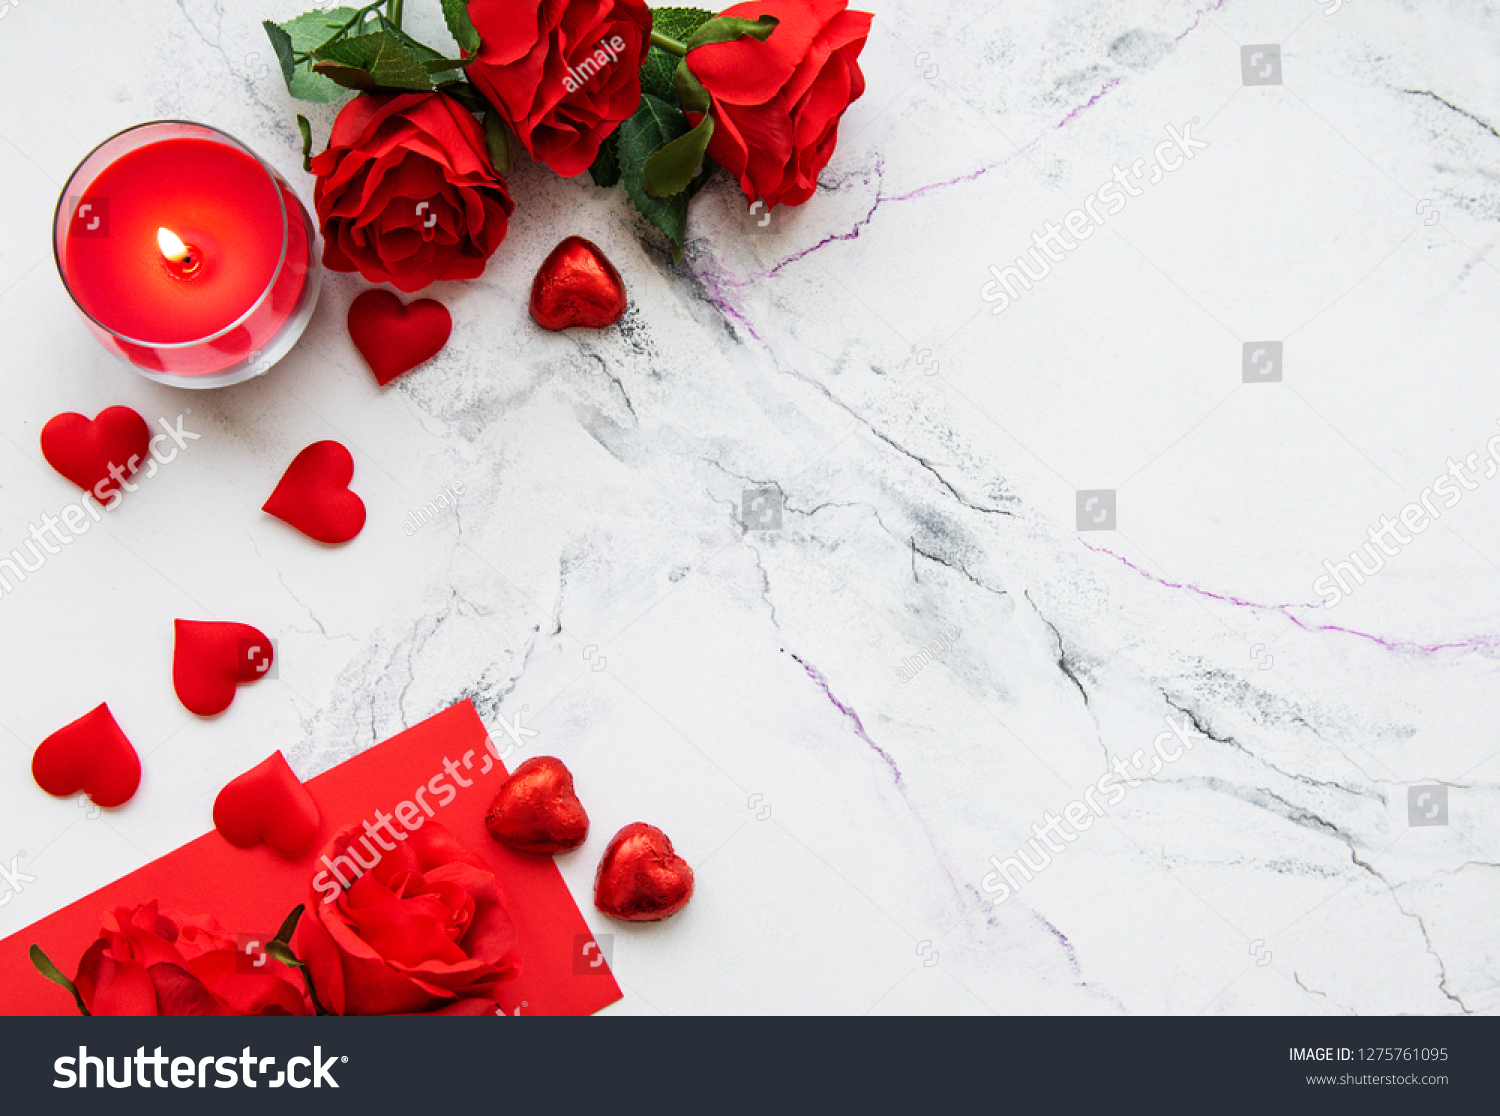 Valentines day romantic background - red roses, candle and hearts #1275761095